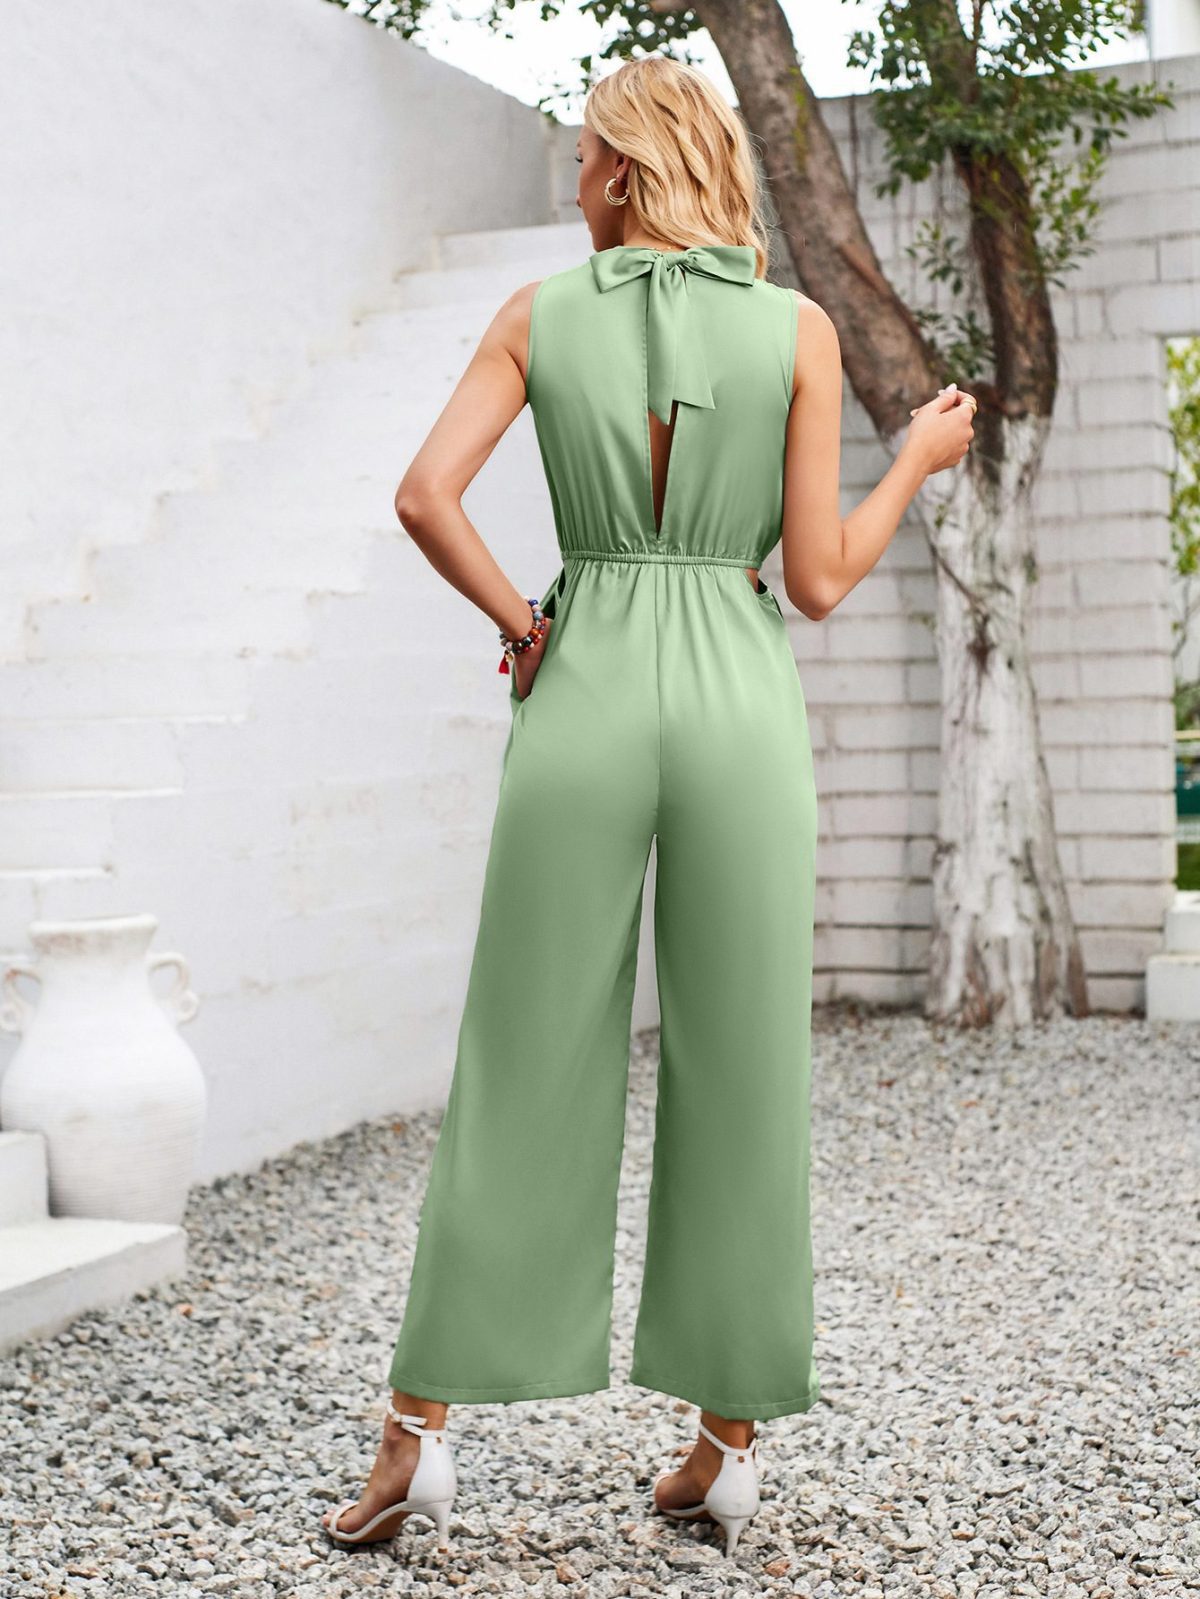 Pile Collar Solid Color Hollow Out Cutout Jumpsuit in Jumpsuits & Rompers